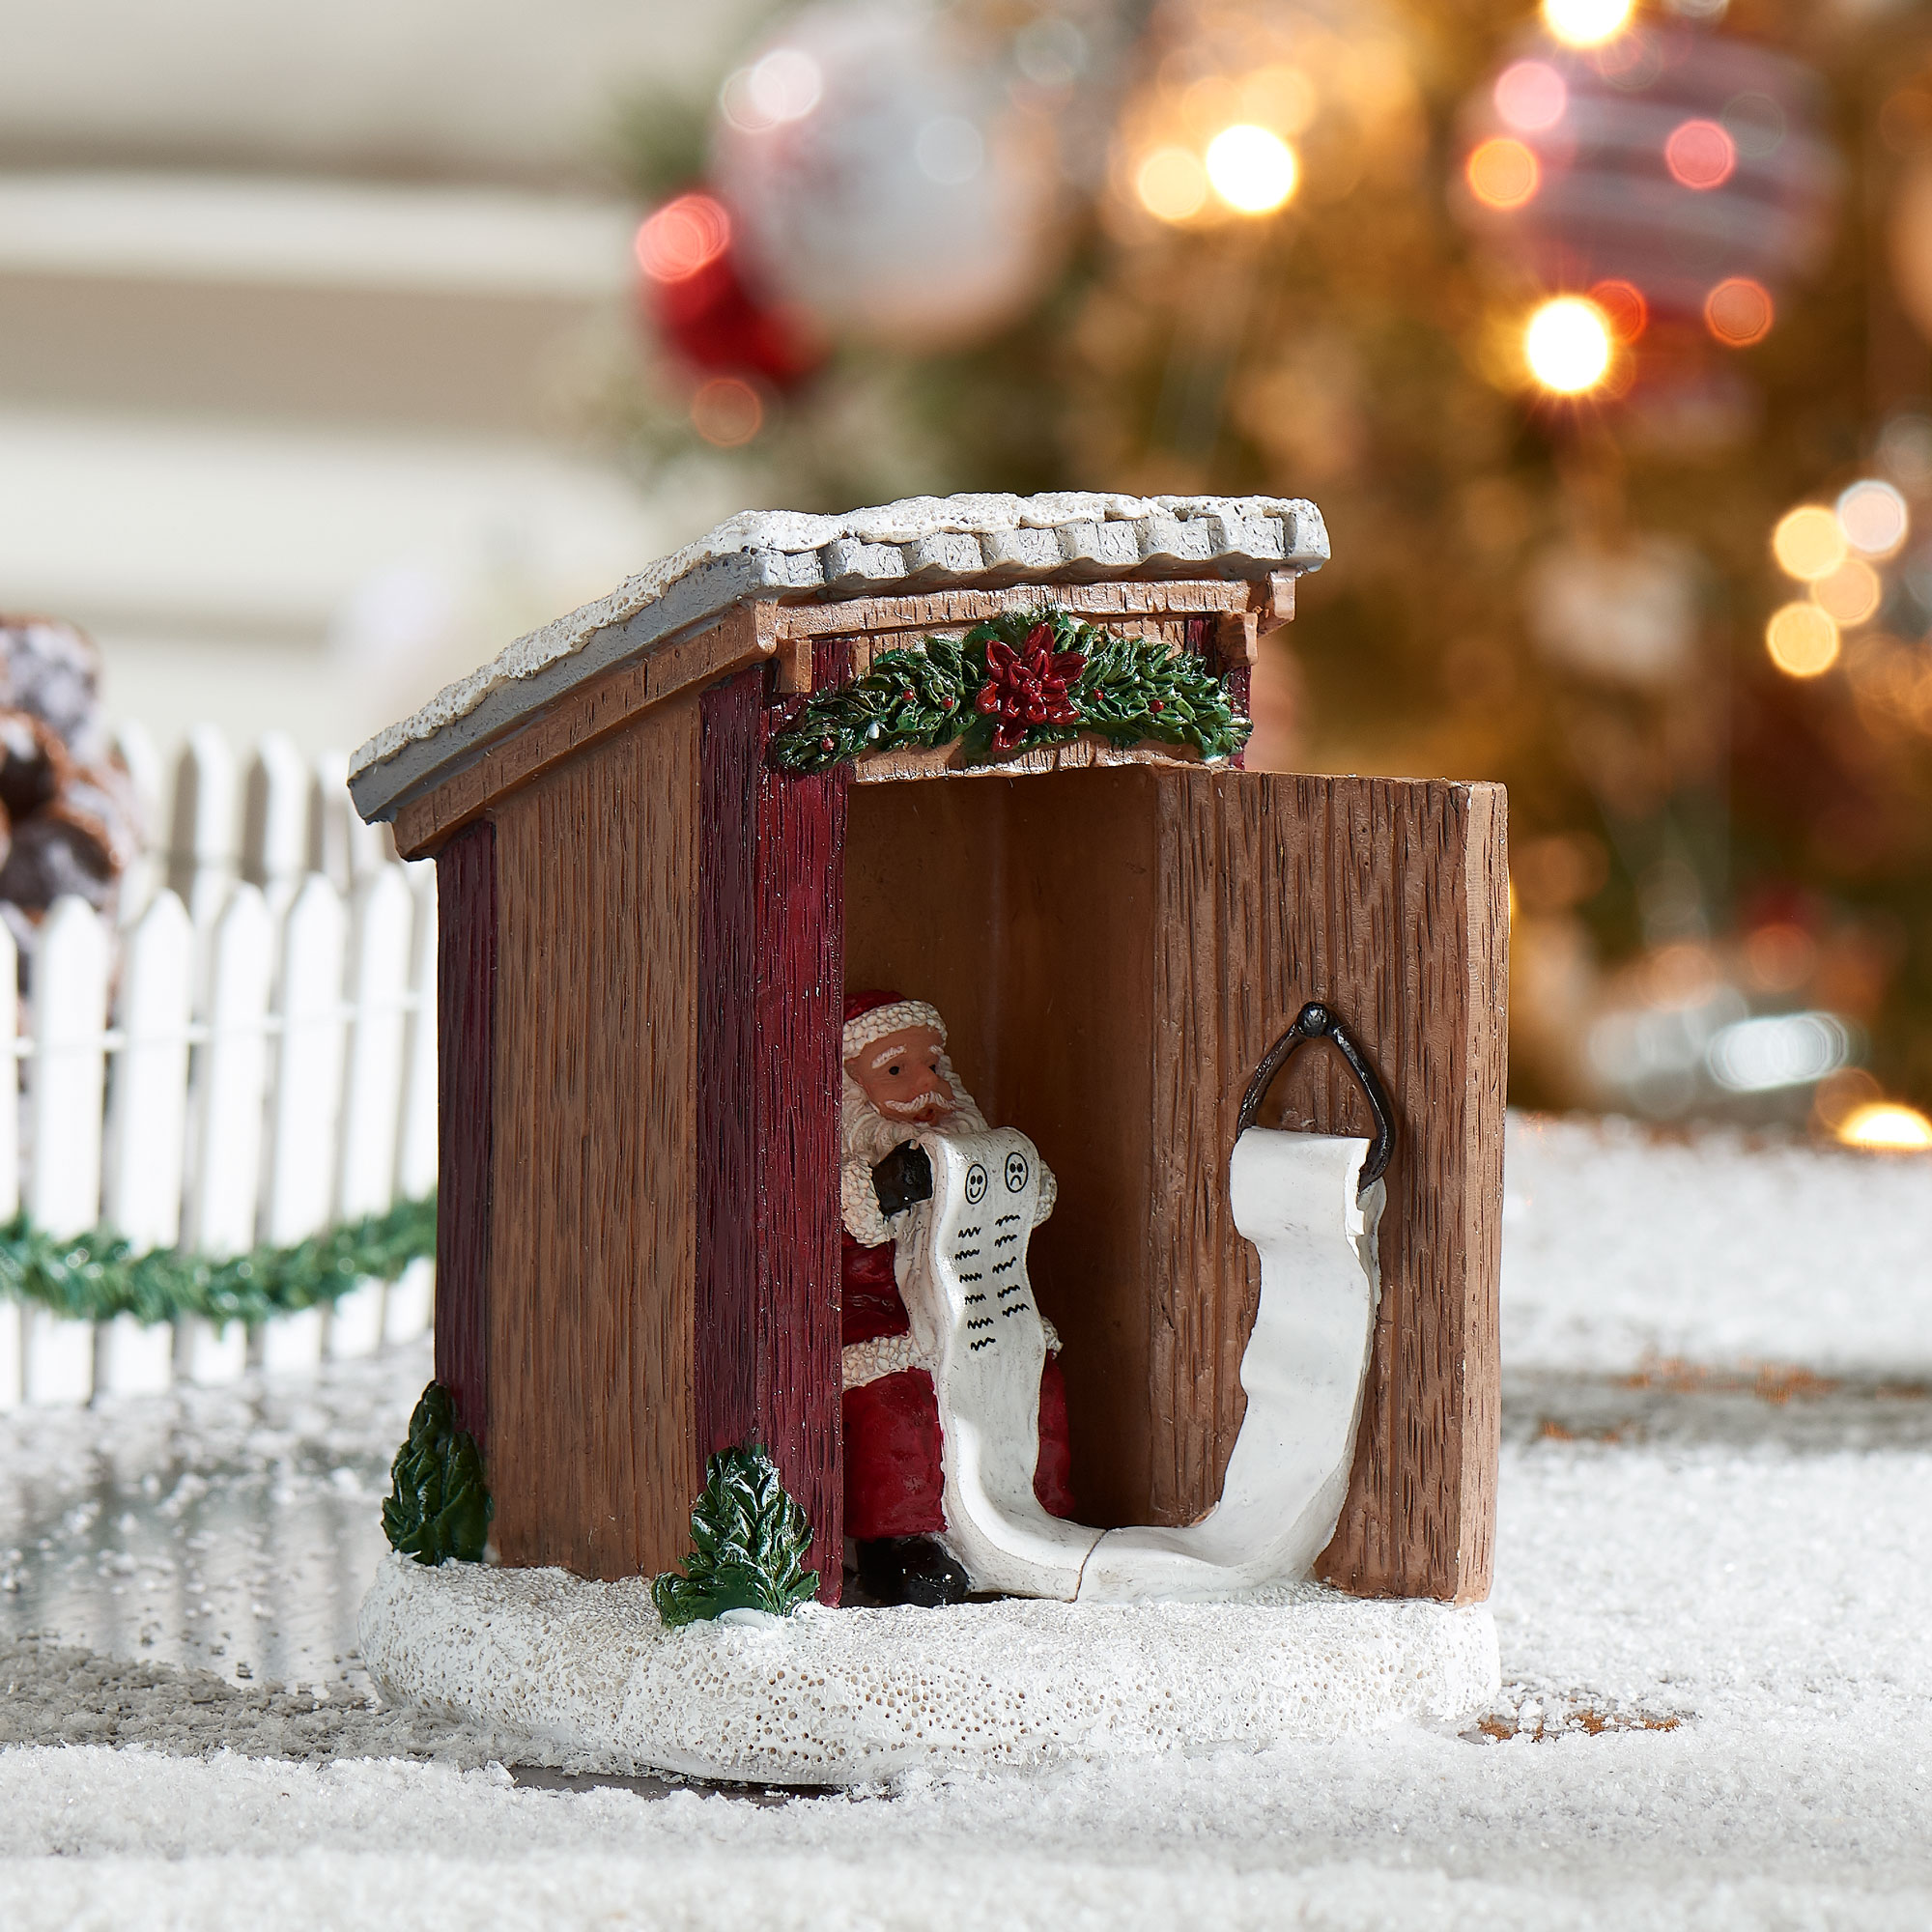 Holiday Time Santa in Outhouse Christmas Village Collectible Figurine Table Top Decoration - image 2 of 5